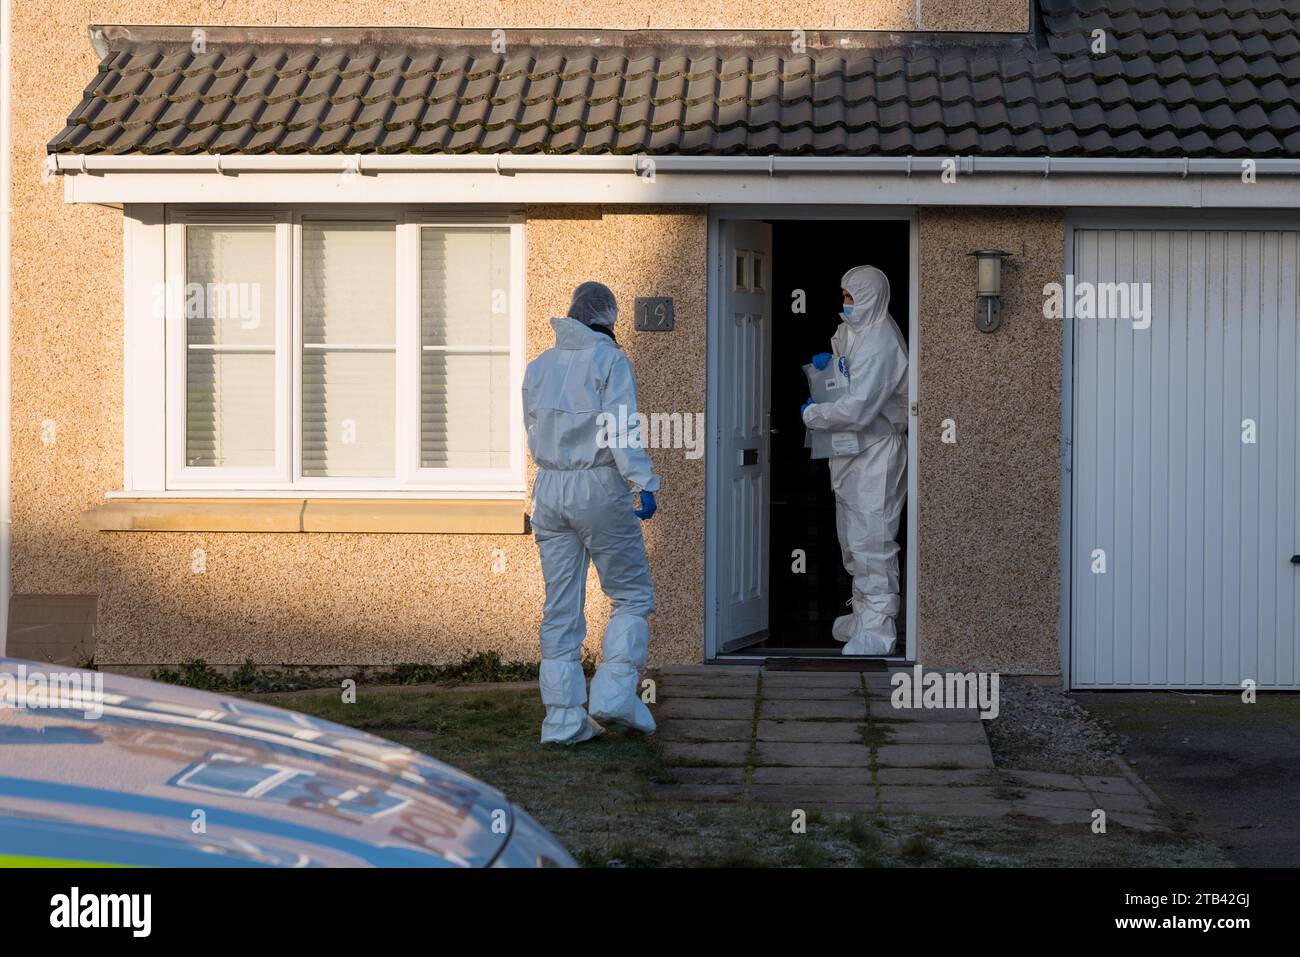 2 December 2023, Elgin,Moray,Scotland. This is Police Scotland Forensics team with White Forensic Suits working a domestic house in Elgin during a Mur Stock Photo